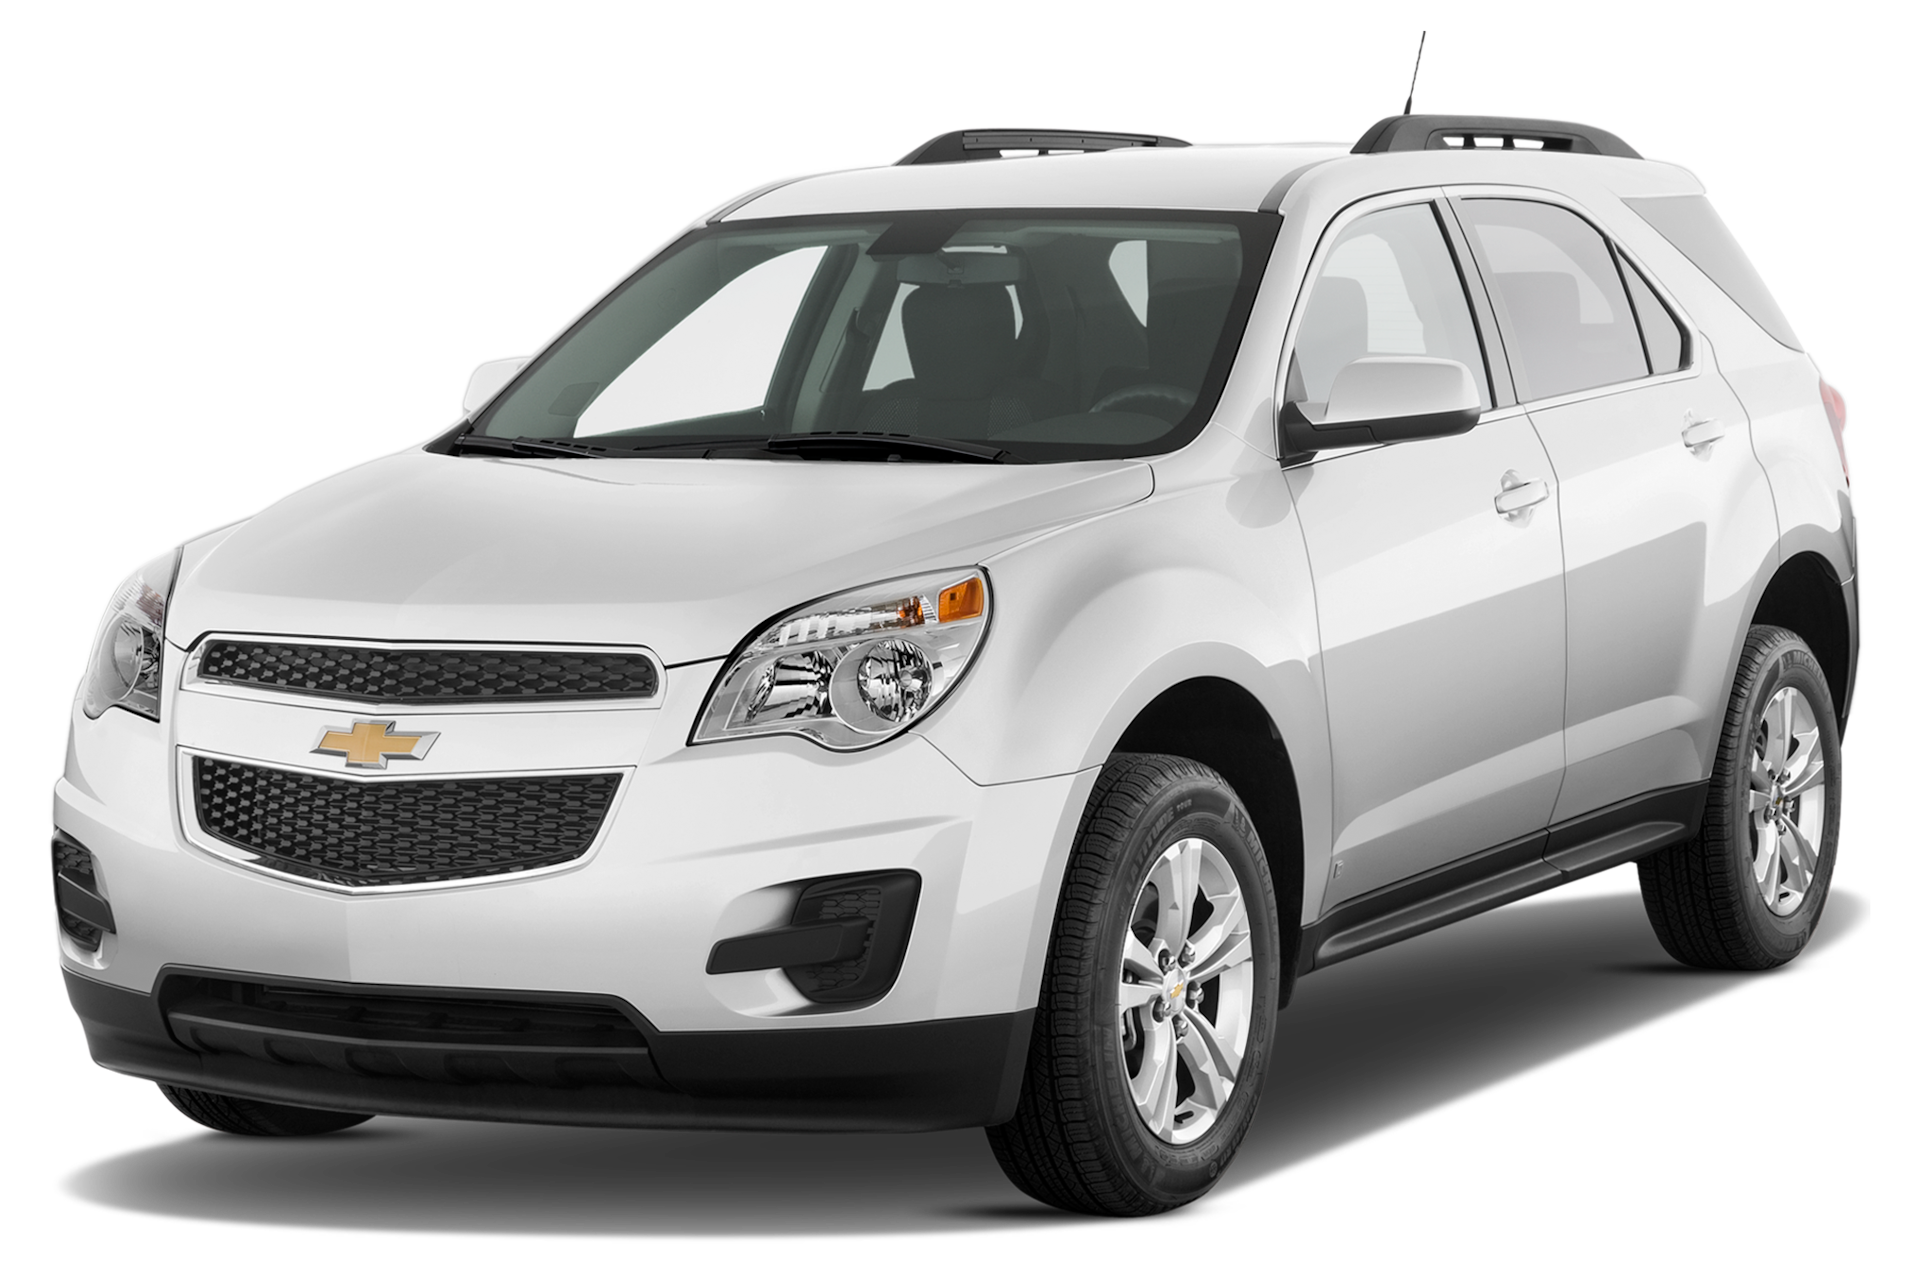 2011 Chevrolet Equinox Prices, Reviews, and Photos - MotorTrend